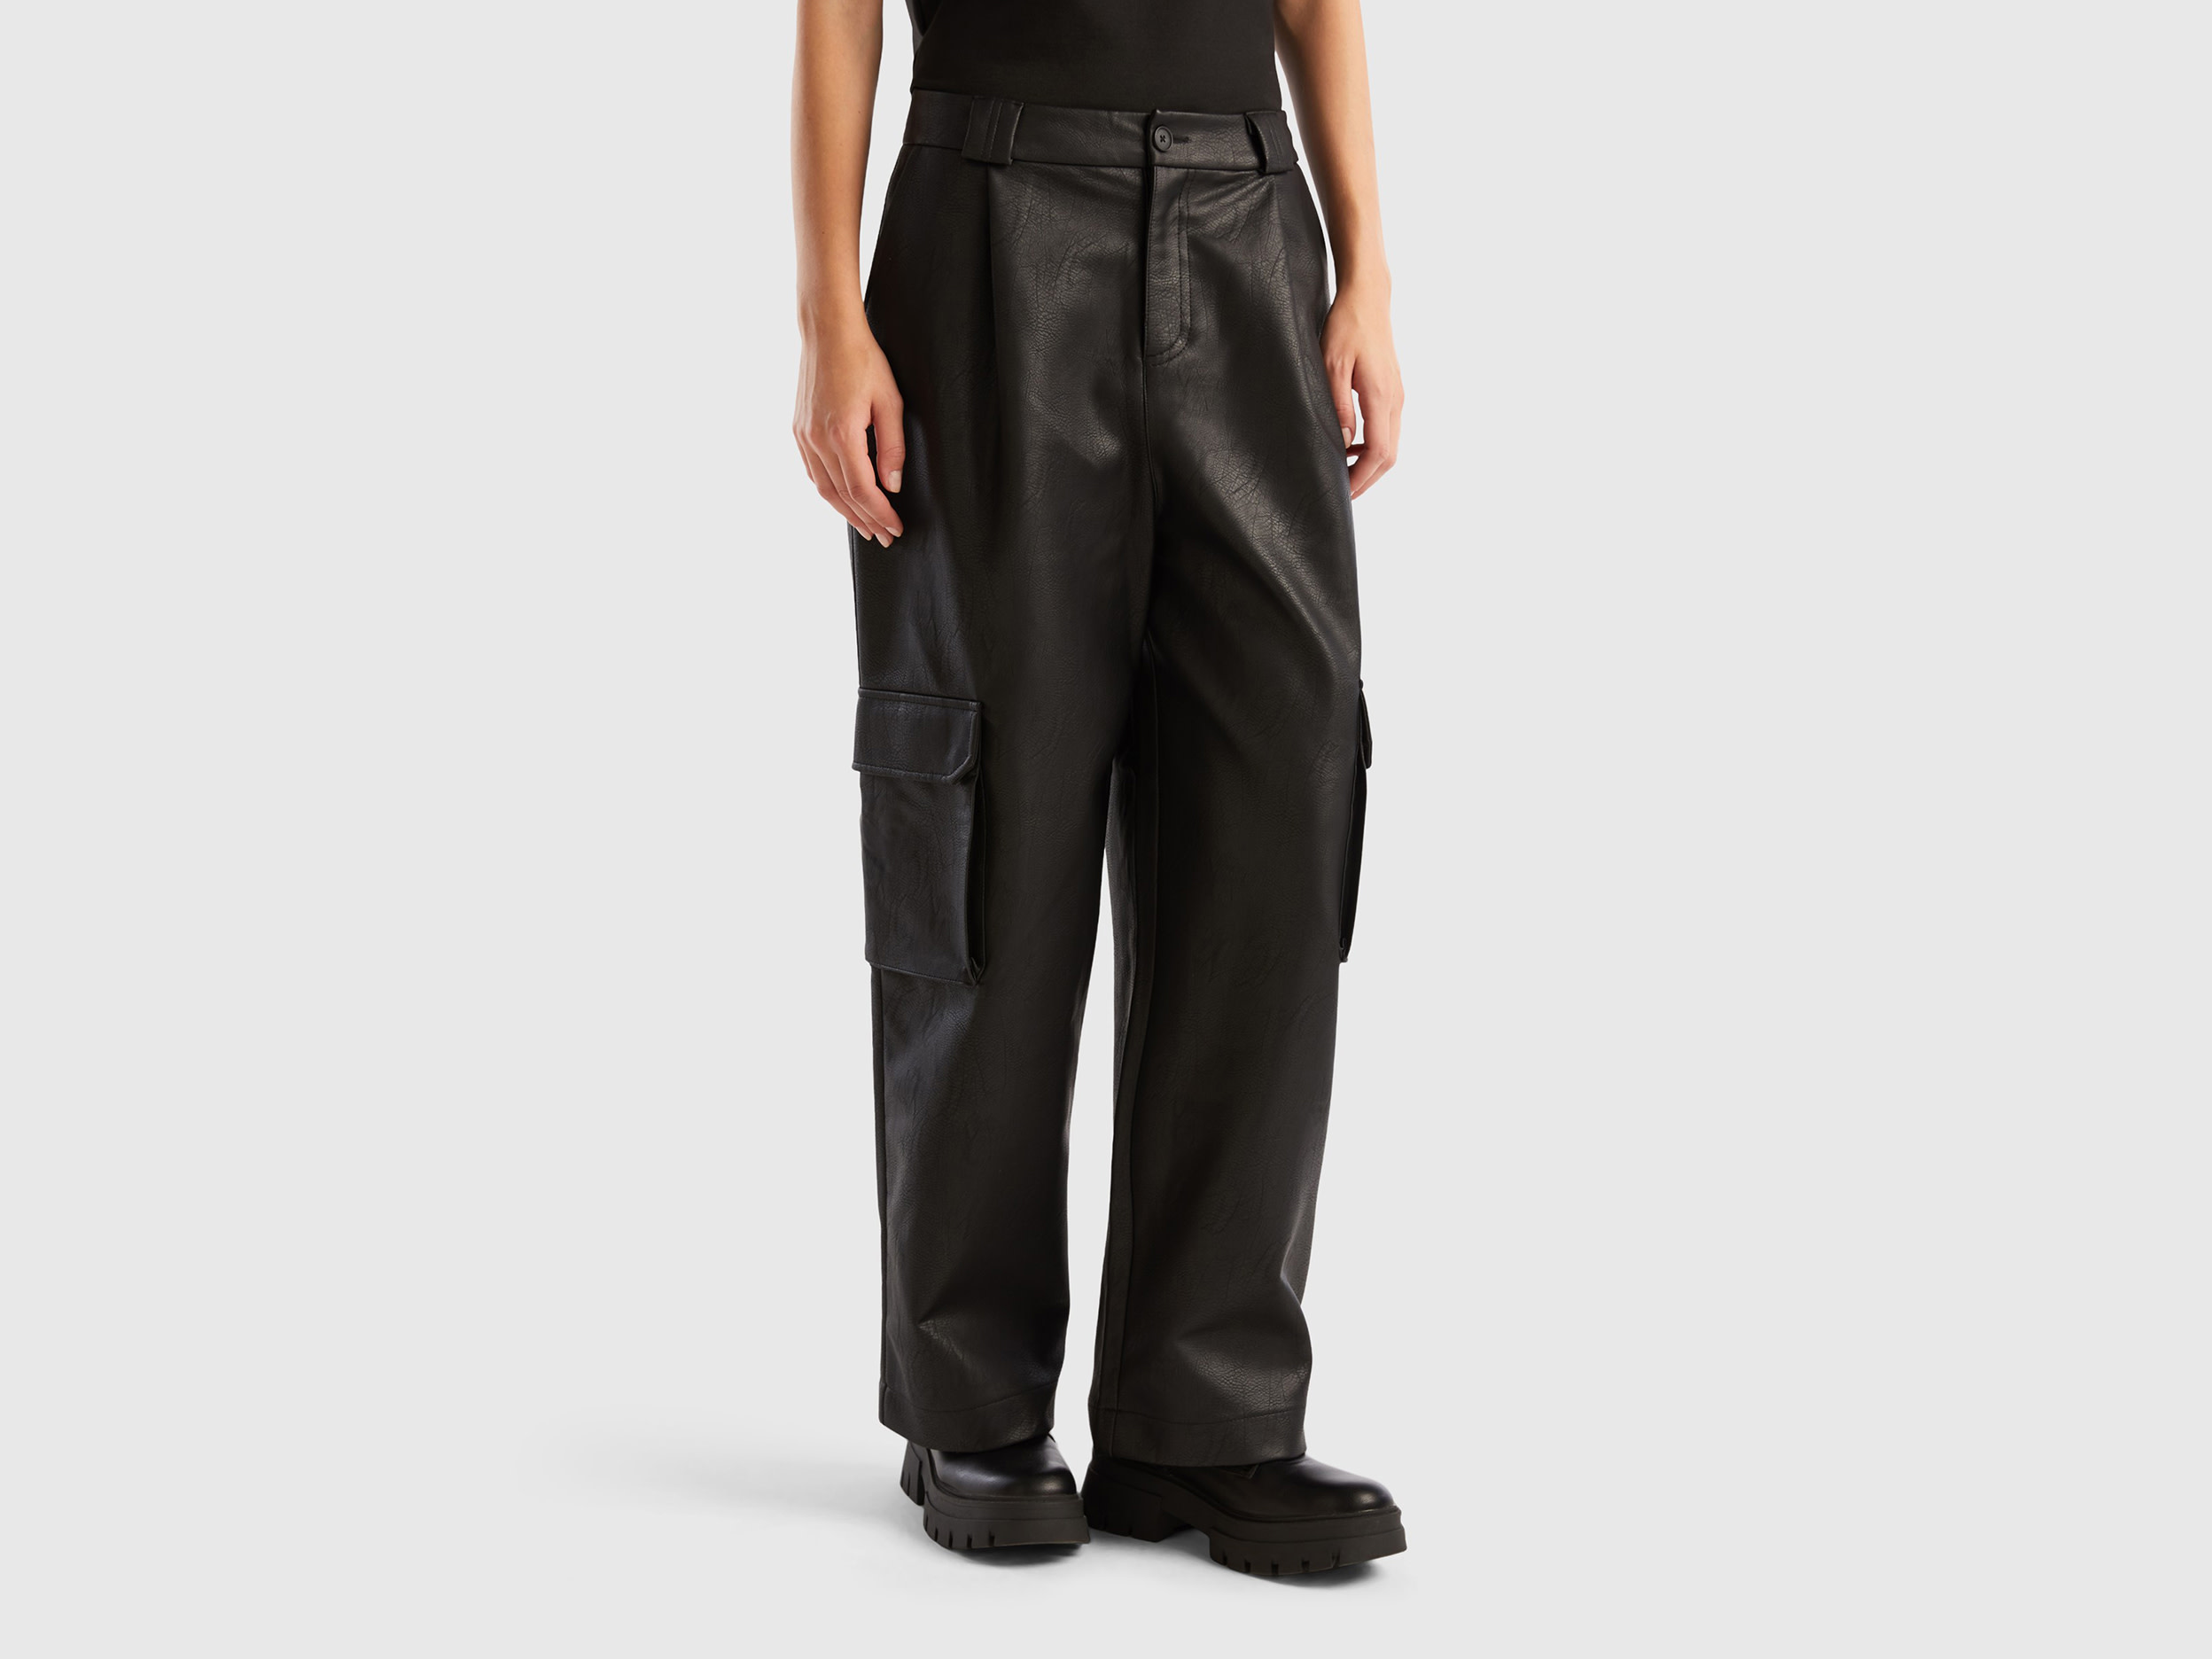 Benetton, Cargo Trousers In Imitation Leather Fabric, size 10, Black, Women